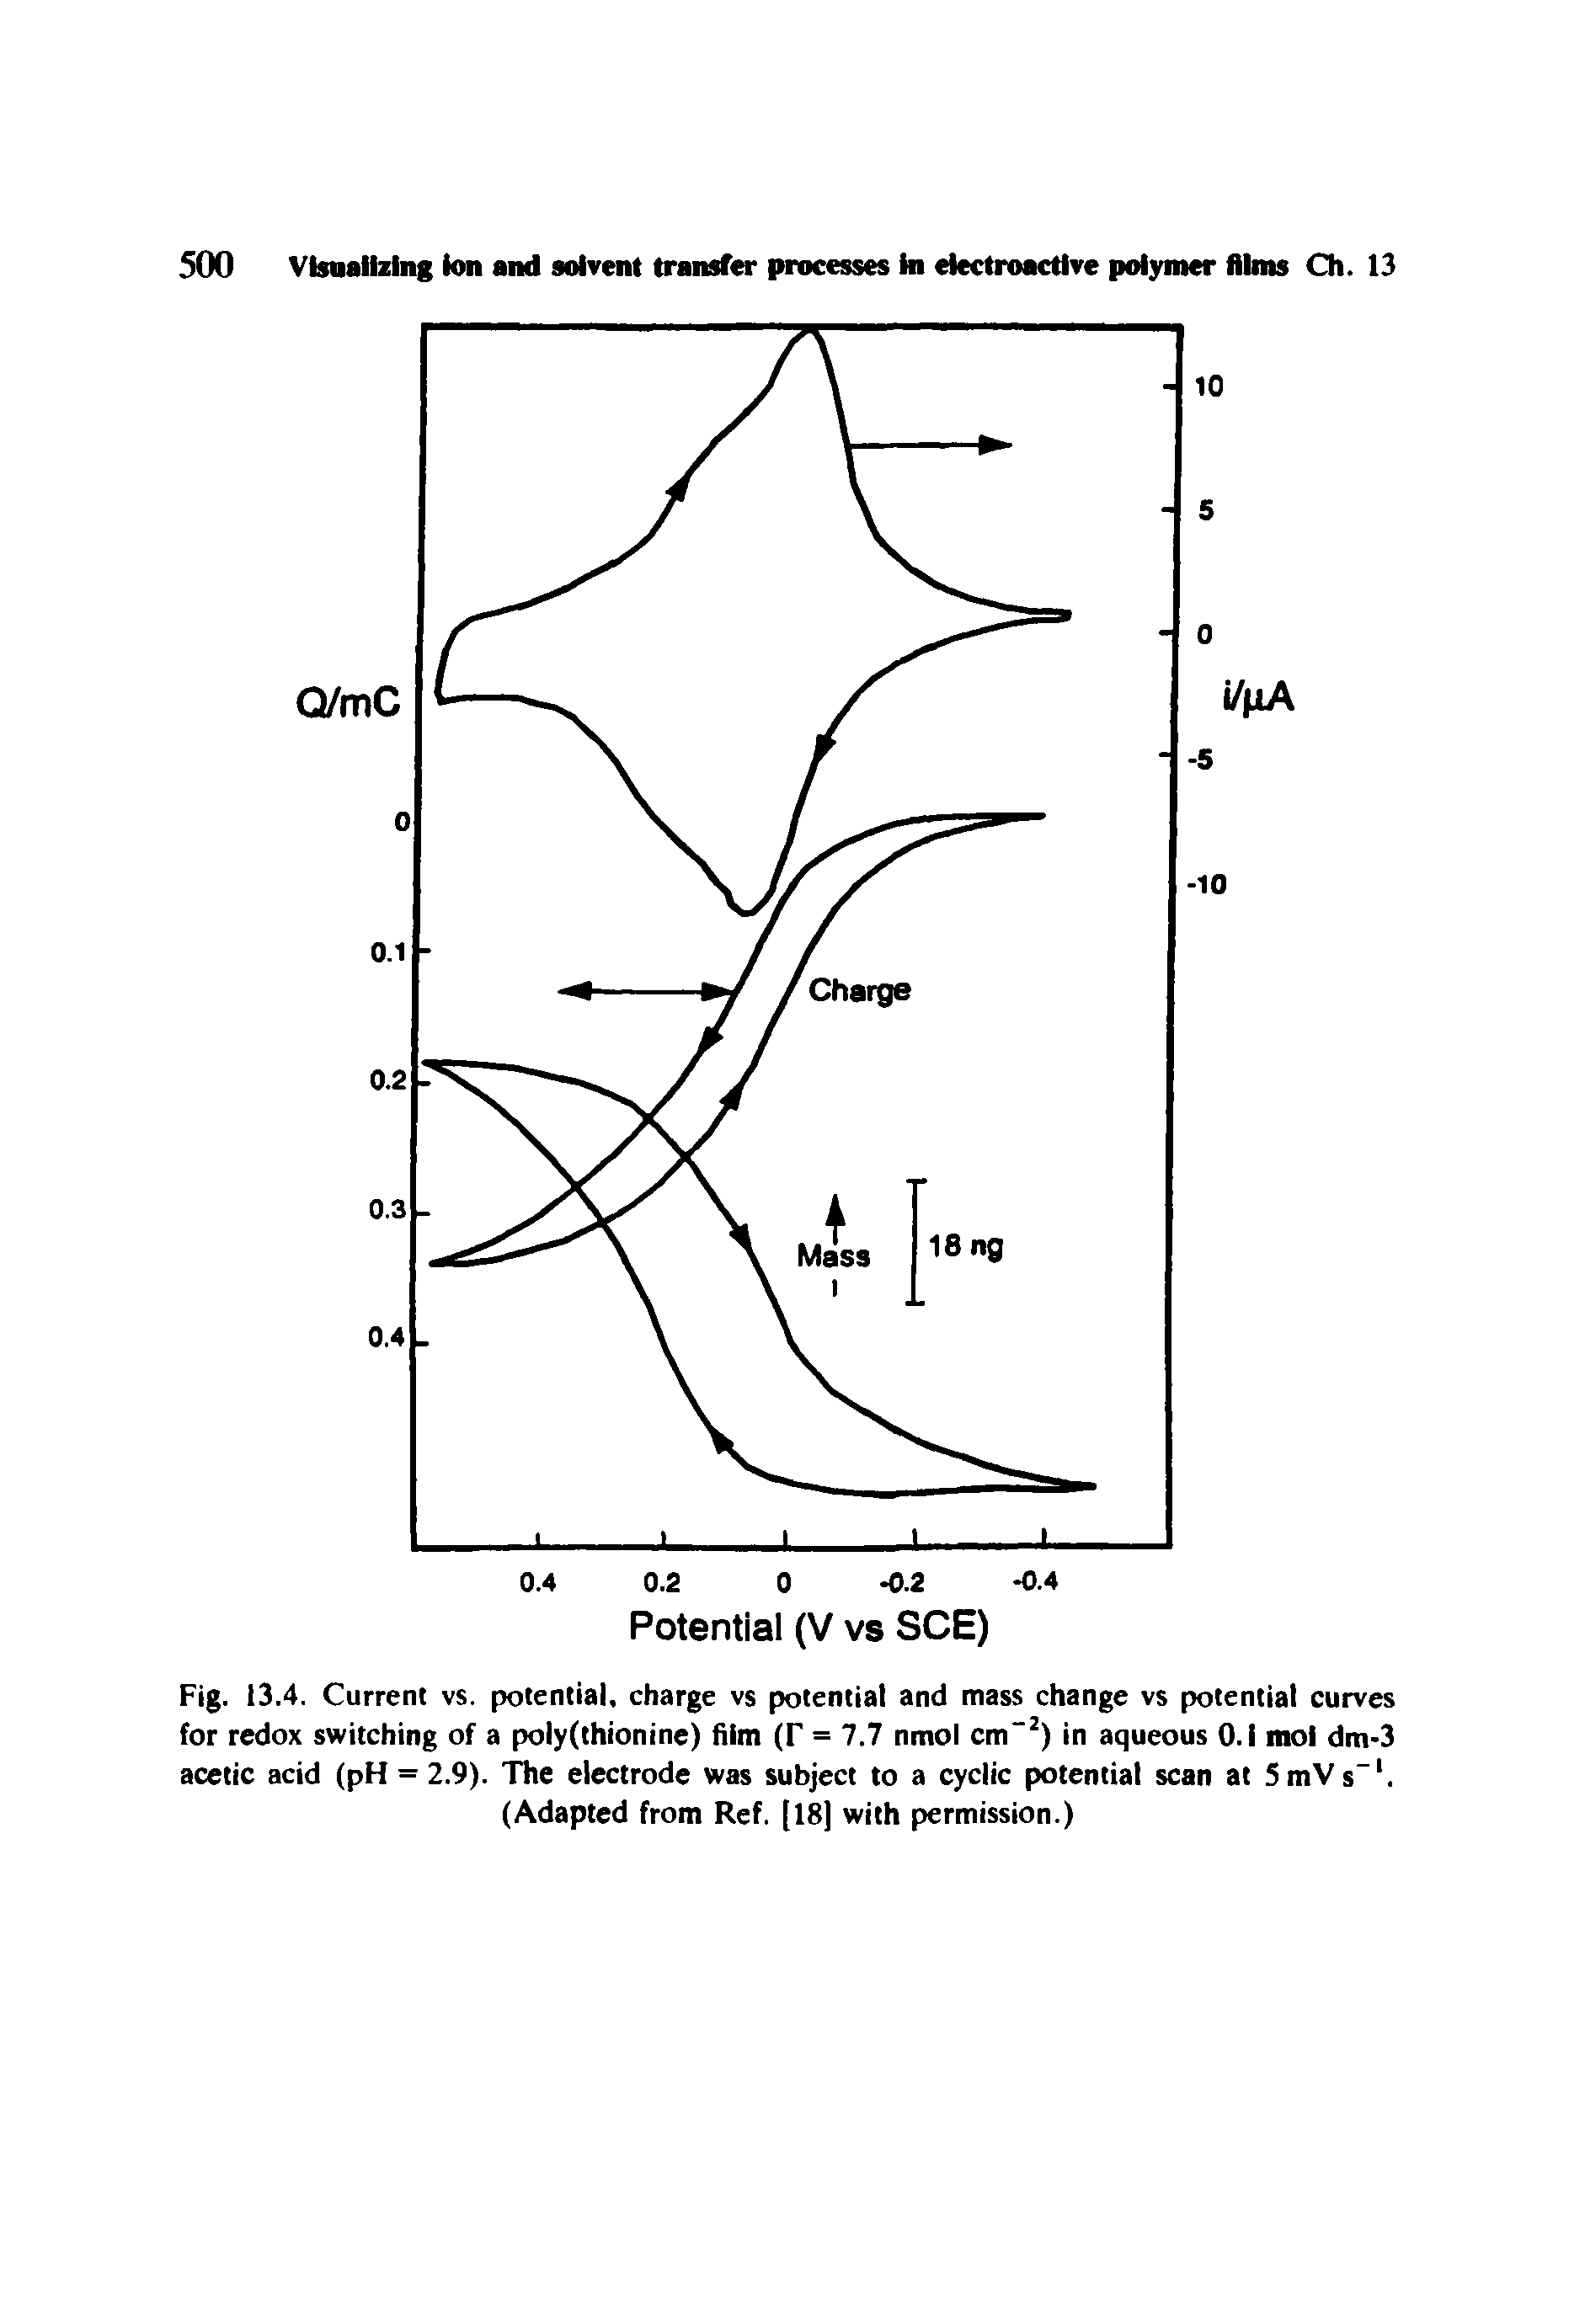 Fig. 13.4. Current vs. potential, charge vs potential and mass change vs potential curves for redox switching of a poly(thionine) film (r = 7.7 nmol cm-2) in aqueous O.i mol dm-3 acetic acid (pH = 2.9). The electrode was subject to a cyclic potential scan at 5 mV s l. (Adapted from Ref. [18] with permission.)...